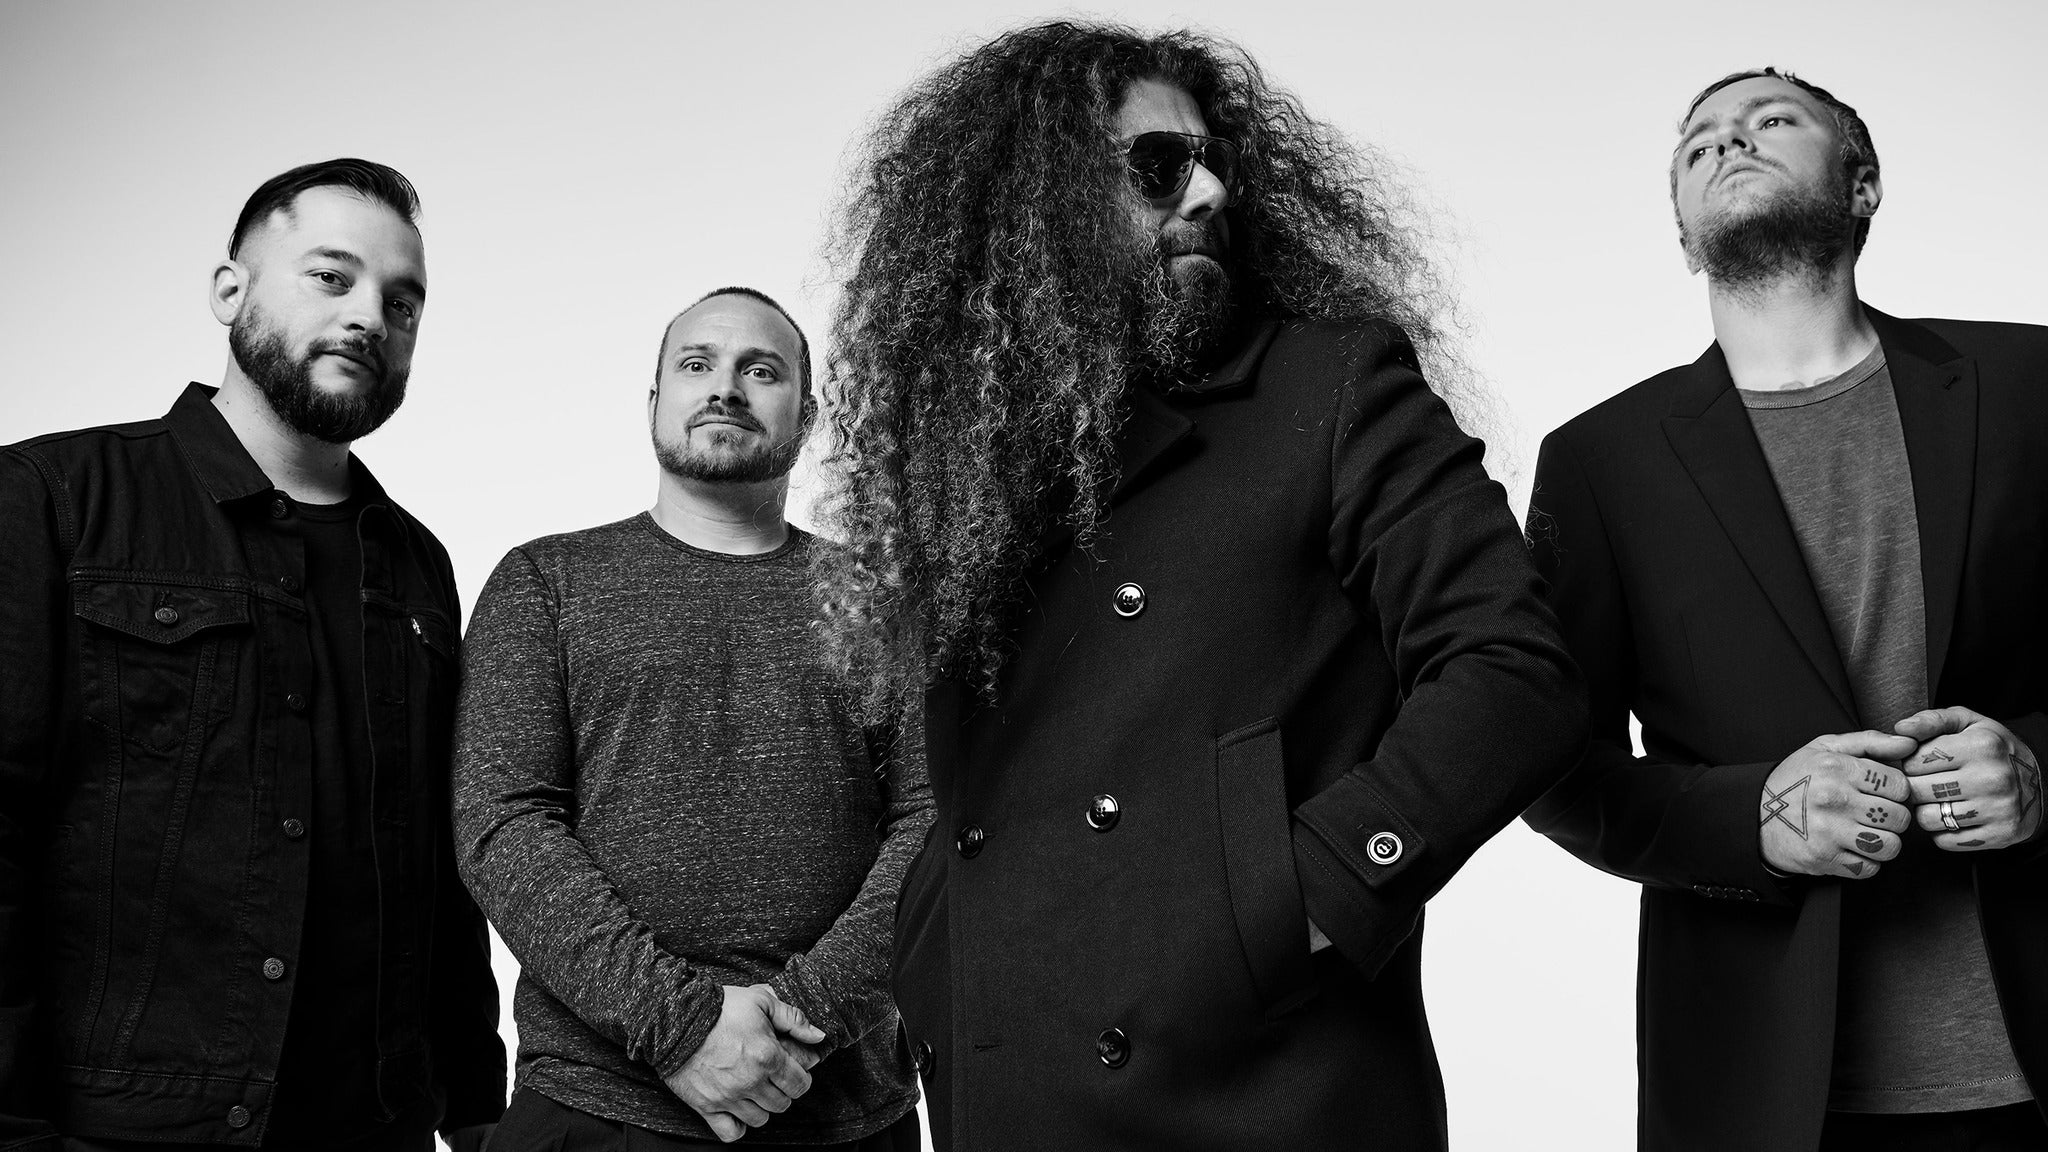 Coheed And Cambria & The Used 2021 in Maryland Heights promo photo for Bandsintown presale offer code